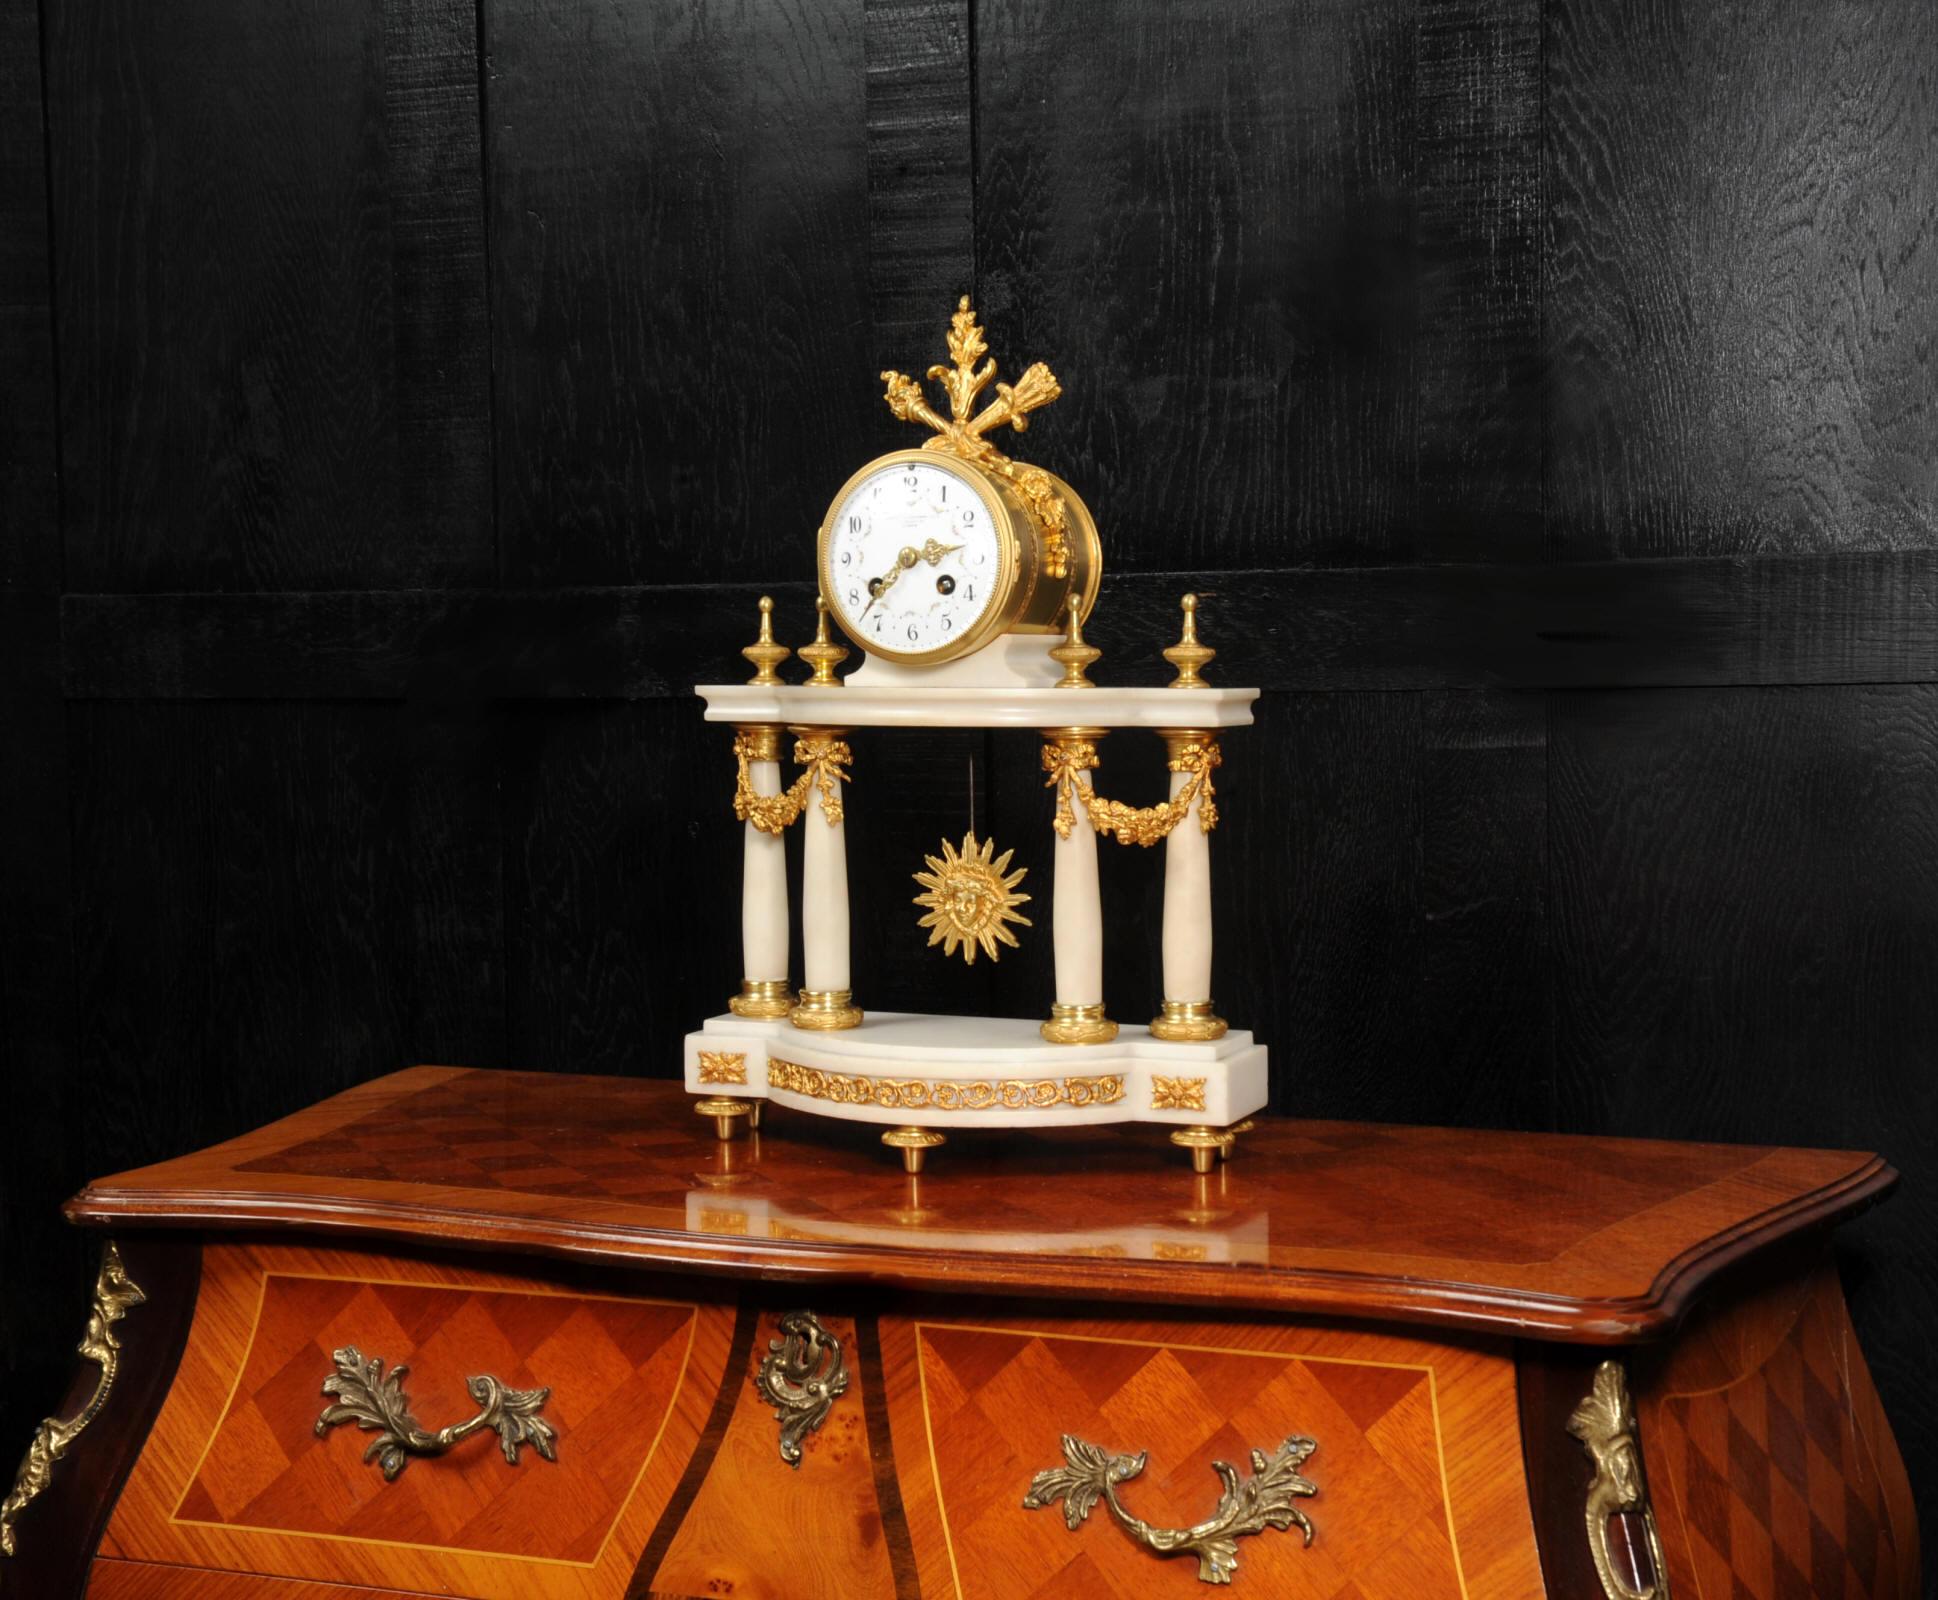 A beautiful Antique French portico clock retailed by the famous Goldsmiths and Silversmiths Co of Regent Street, London. It is of the classical style of Louis XVI, made of white marble mounted with ormolu (finely gilded bronze). The movement is held